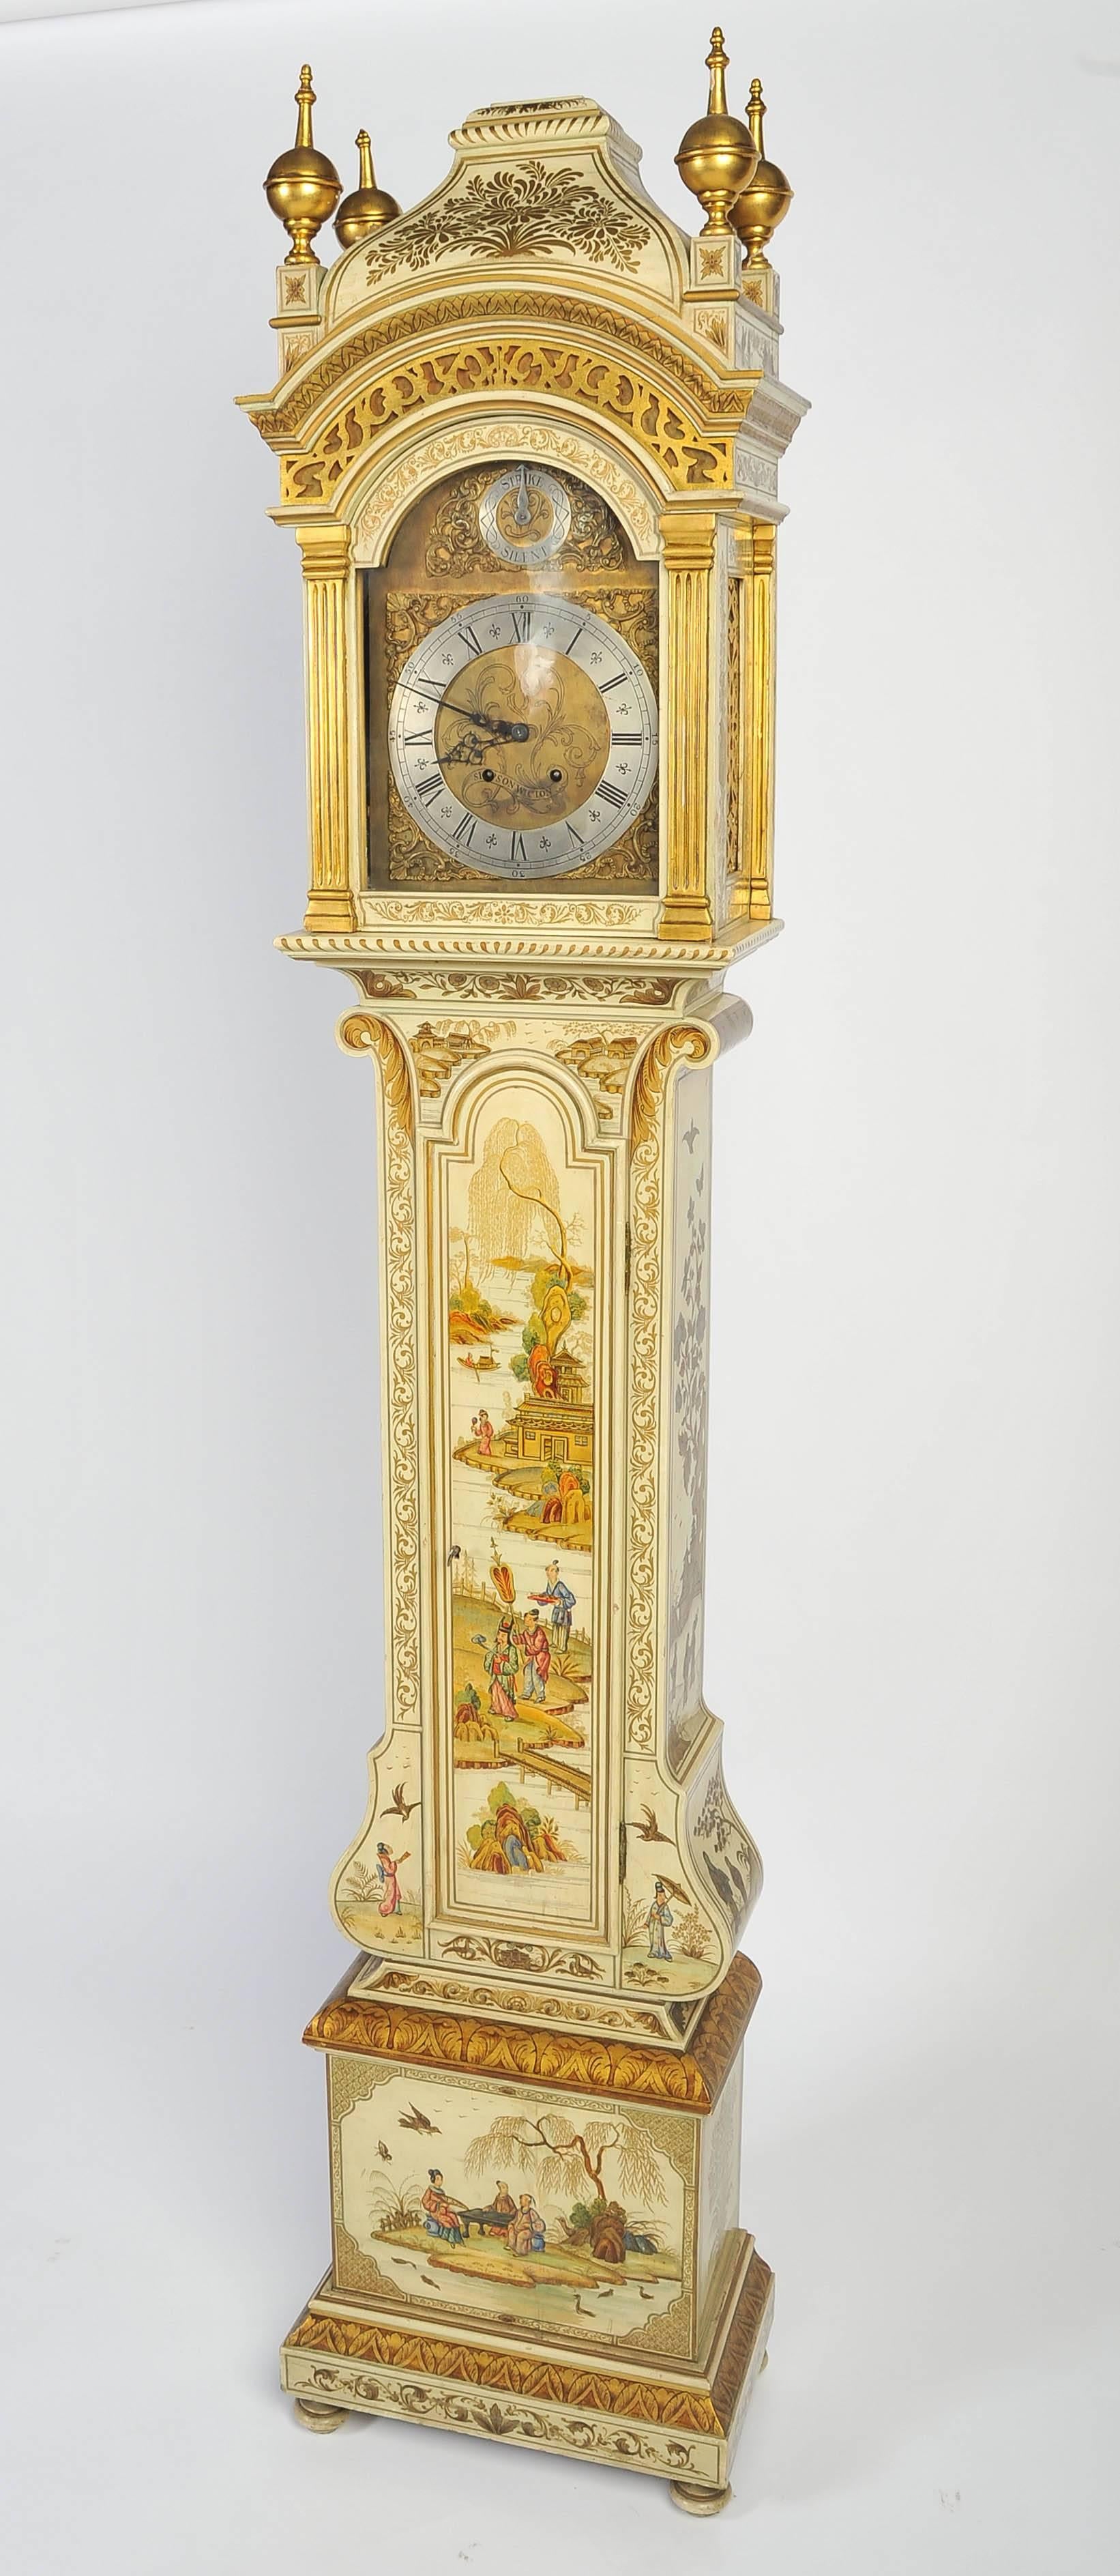 A very good quality Chippendale influenced chinoiserie ivory lacquer grandmother clock. Having gilded decoration to the finials and case, classical oriental scenes, brass faced arch dial and an eight day movement.